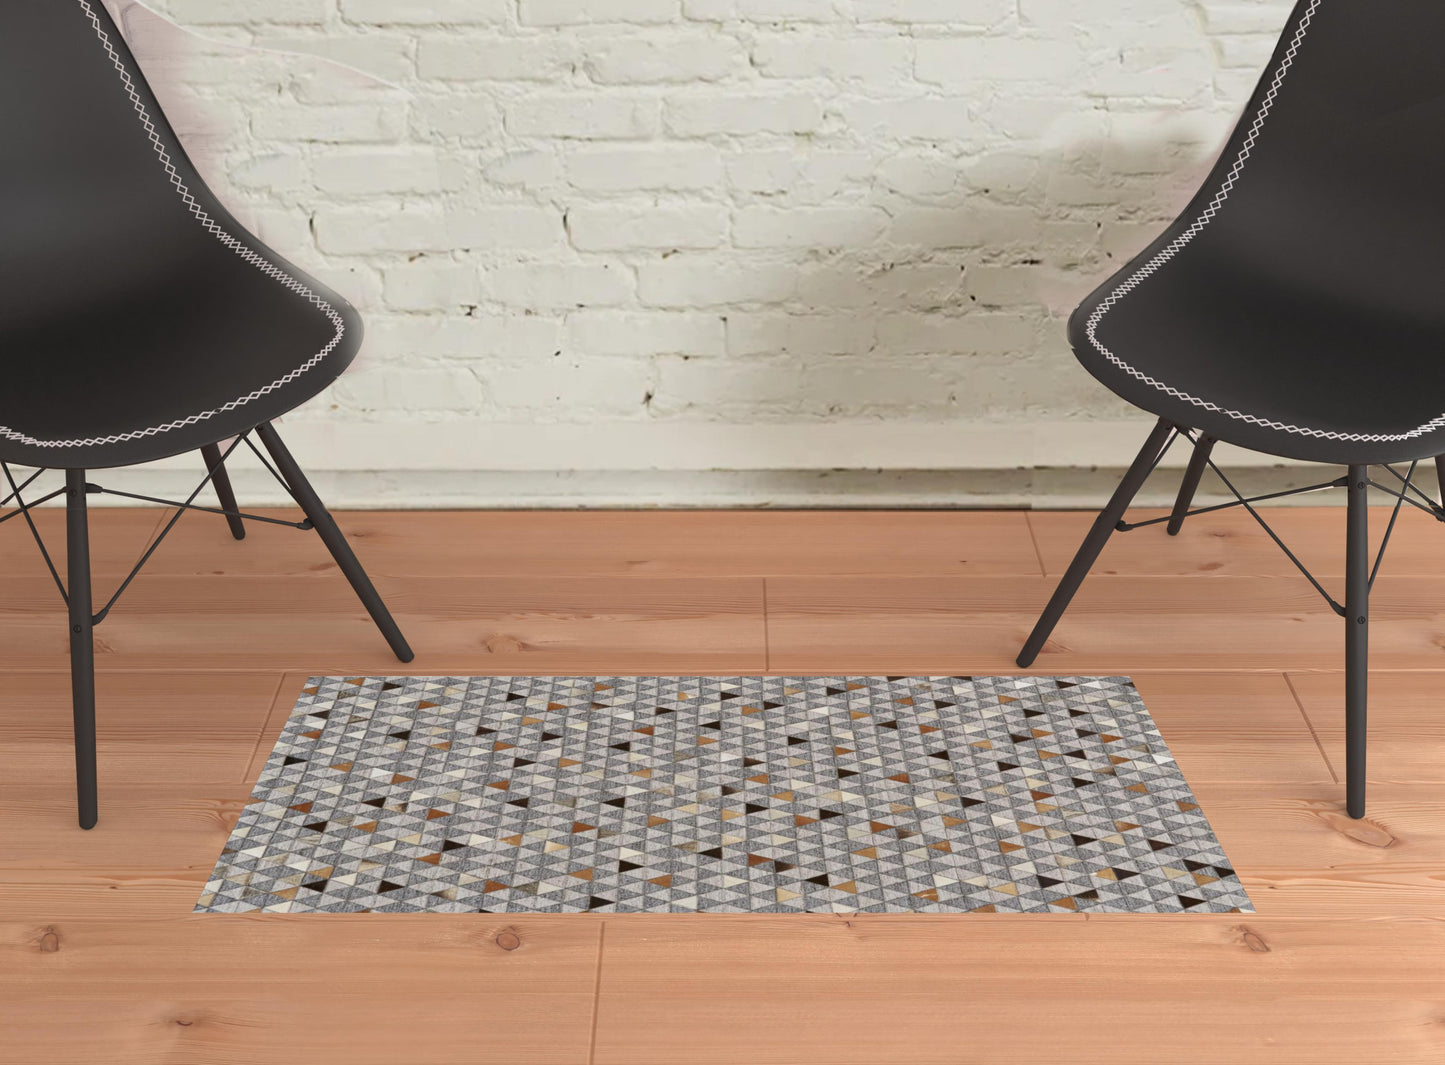 5' X 8' Gray Ivory And Brown Geometric Hand Woven Area Rug